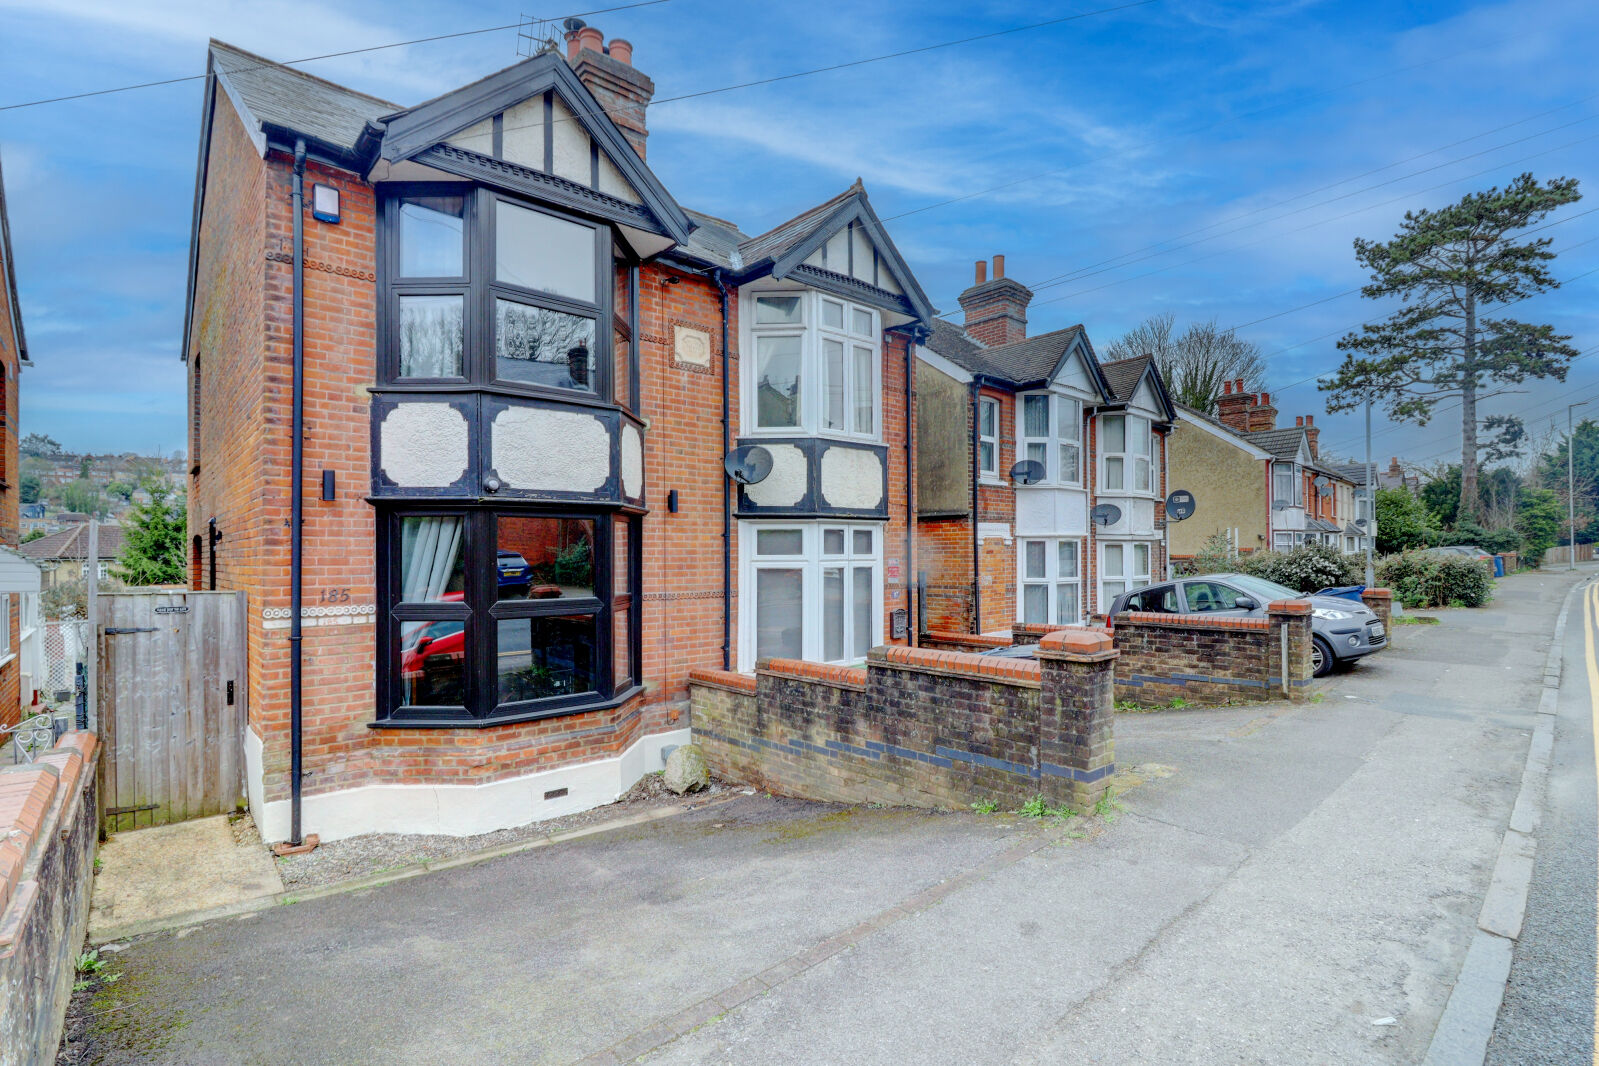 2 bedroom semi detached house for sale Hughenden Road, High Wycombe, HP13, main image